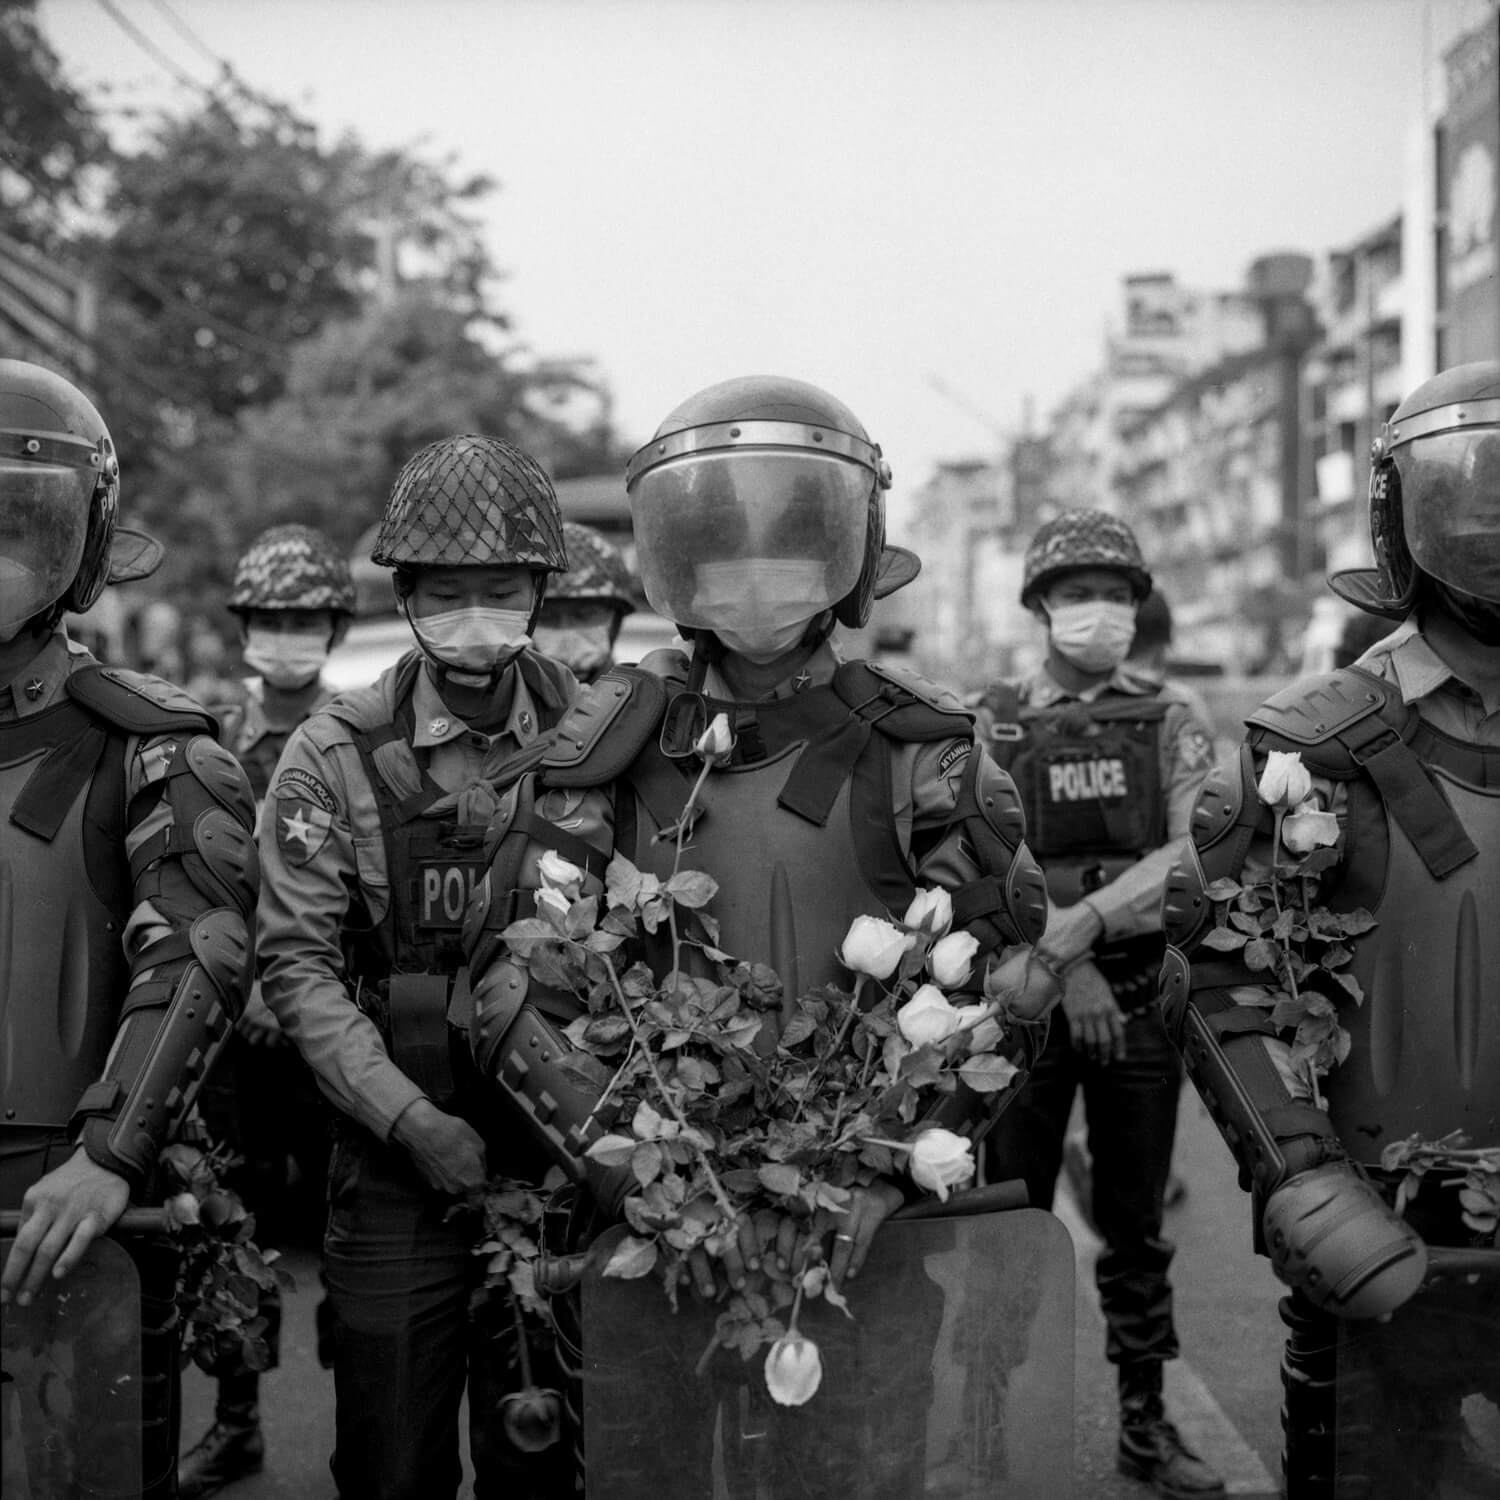 A policeman in riot gear is covered in roses apparently placed upon his person by protestors.